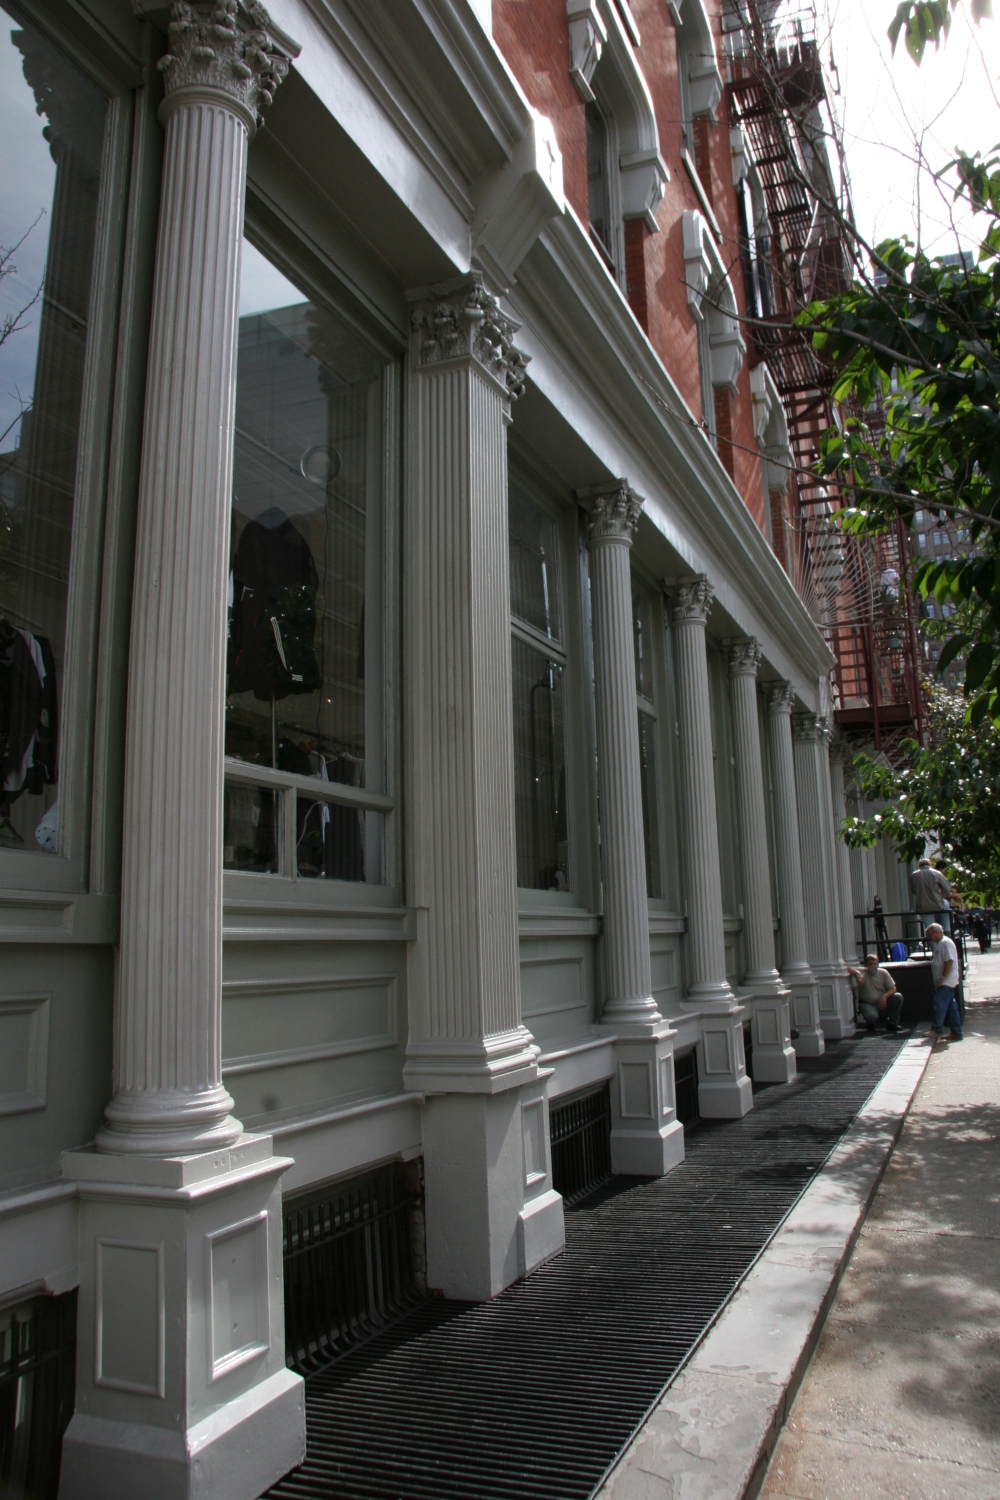 Street view of a renovated building in Manhattan, showcasing Jepol Construction's proficiency in ornamental steel replacement, wood window refurbishment, and metal restoration. Our team's expertise in these areas helps preserve the city's architectural heritage while ensuring structural integrity and aesthetic appeal.